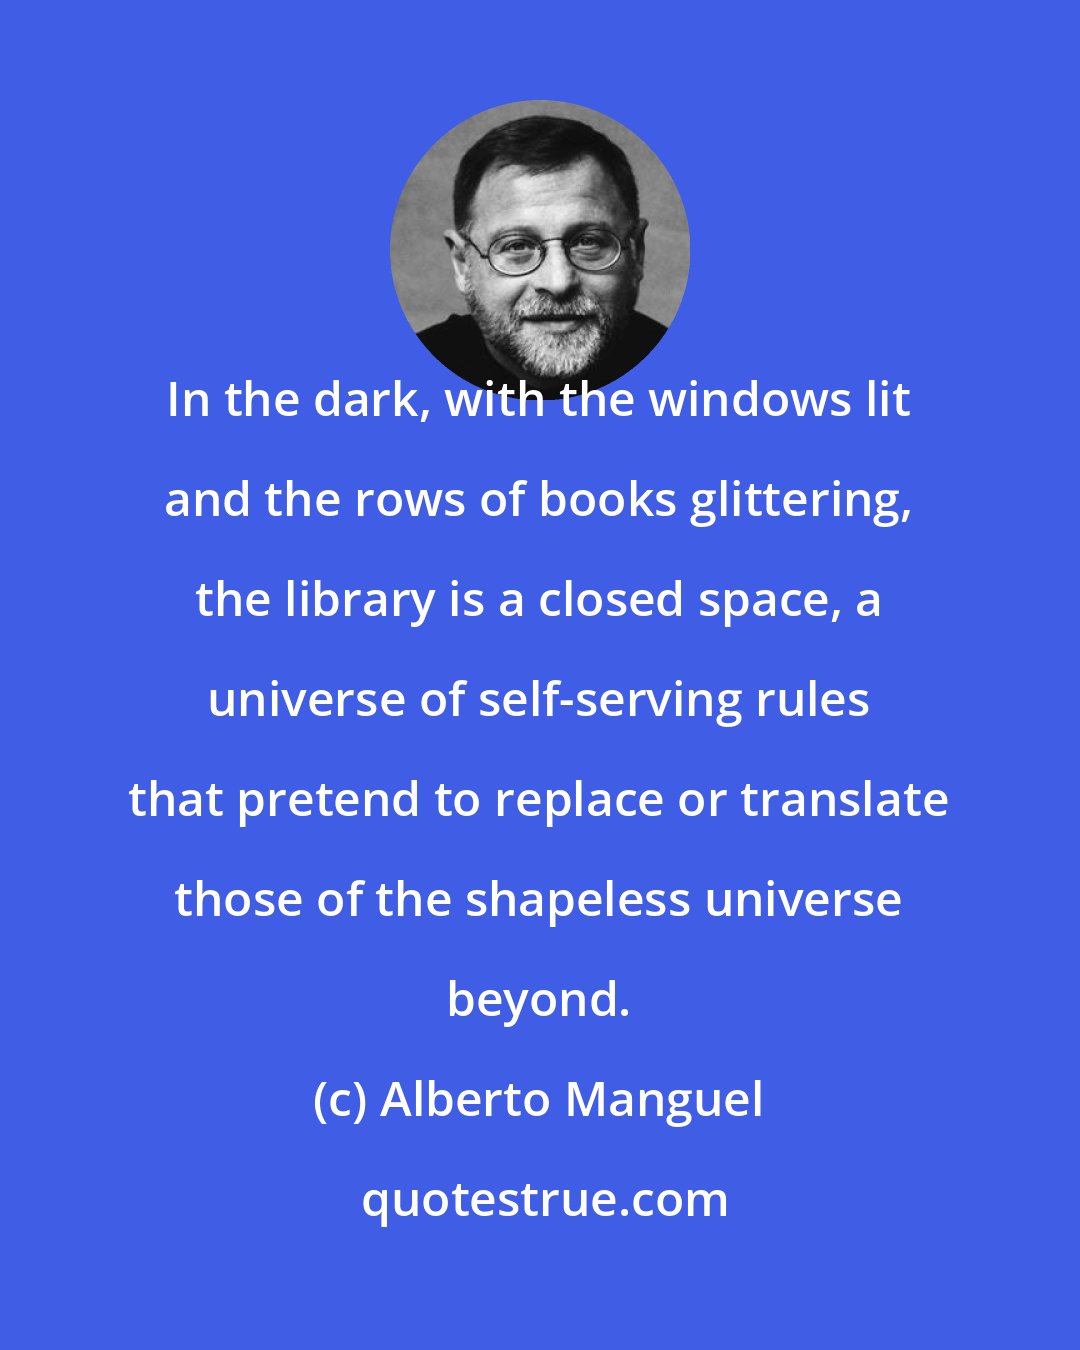 Alberto Manguel: In the dark, with the windows lit and the rows of books glittering, the library is a closed space, a universe of self-serving rules that pretend to replace or translate those of the shapeless universe beyond.